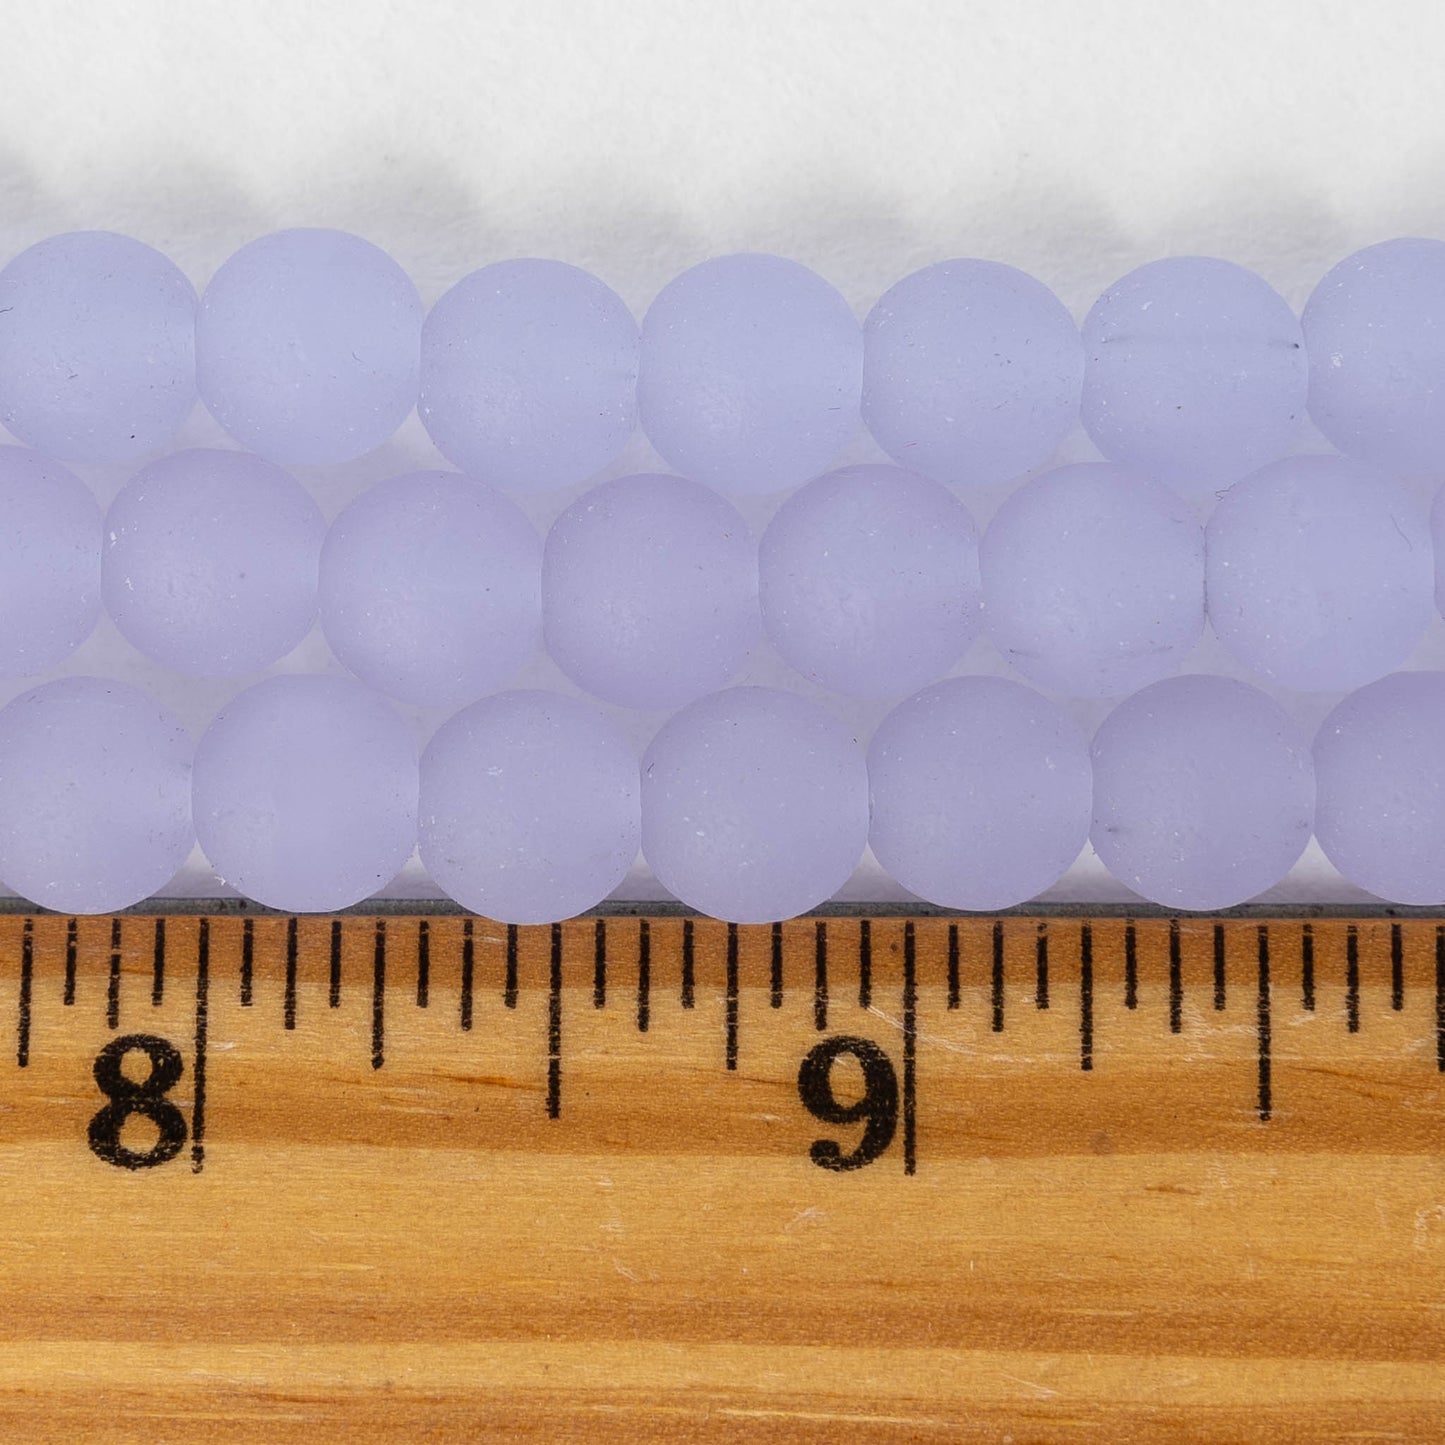 Load image into Gallery viewer, 8mm Frosted Glass Rounds - Opaque Lavender - 16 Inches
